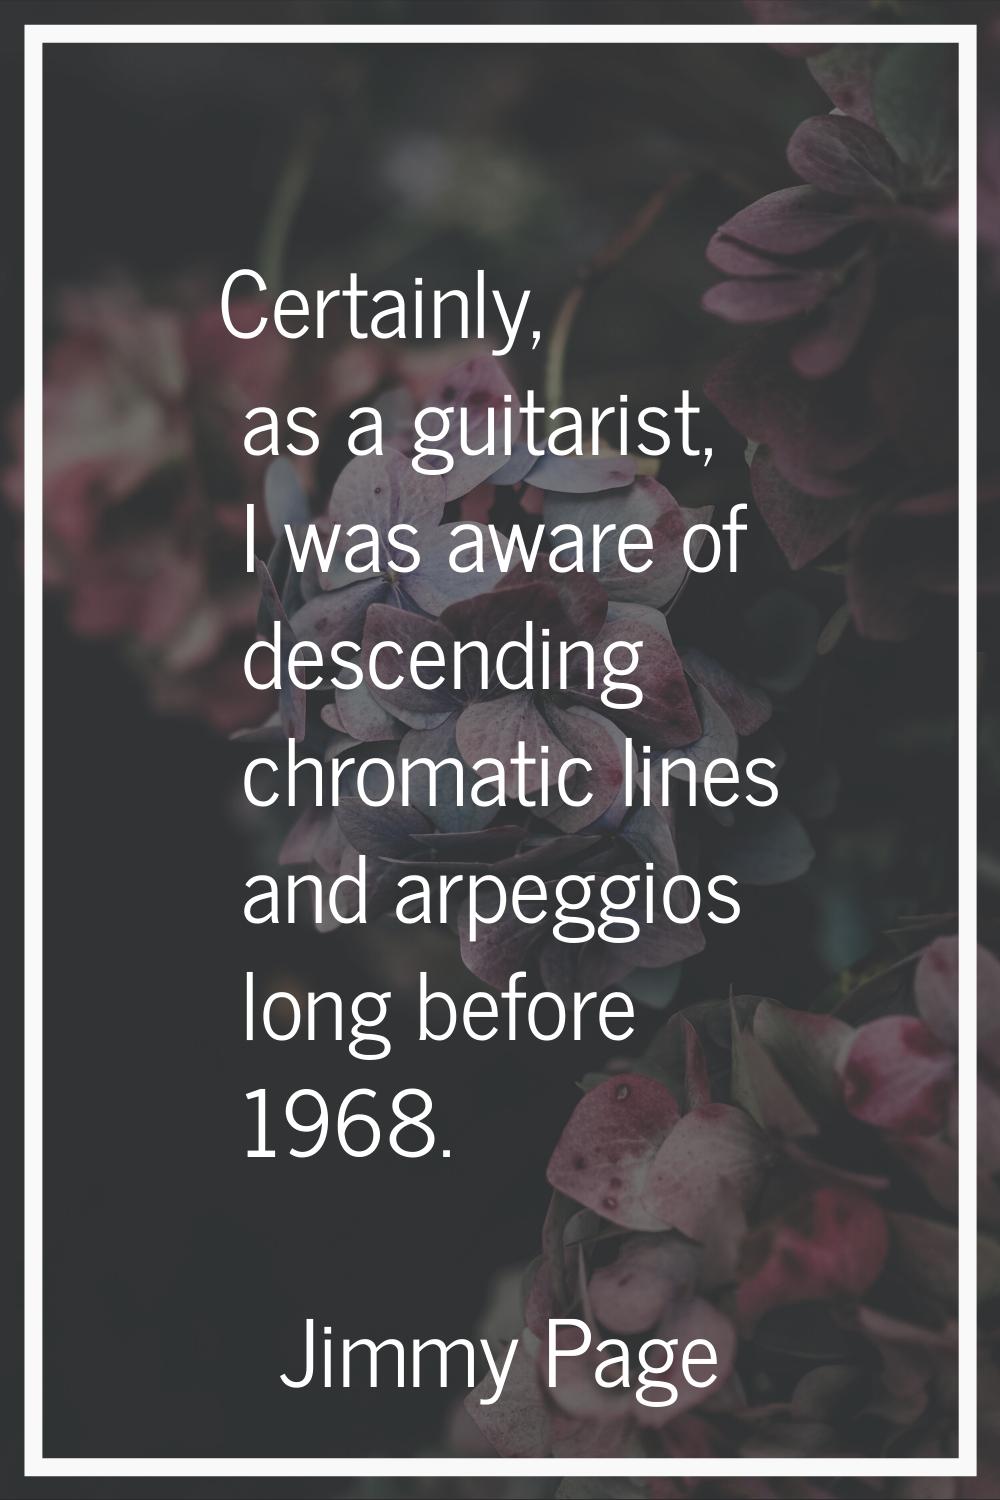 Certainly, as a guitarist, I was aware of descending chromatic lines and arpeggios long before 1968